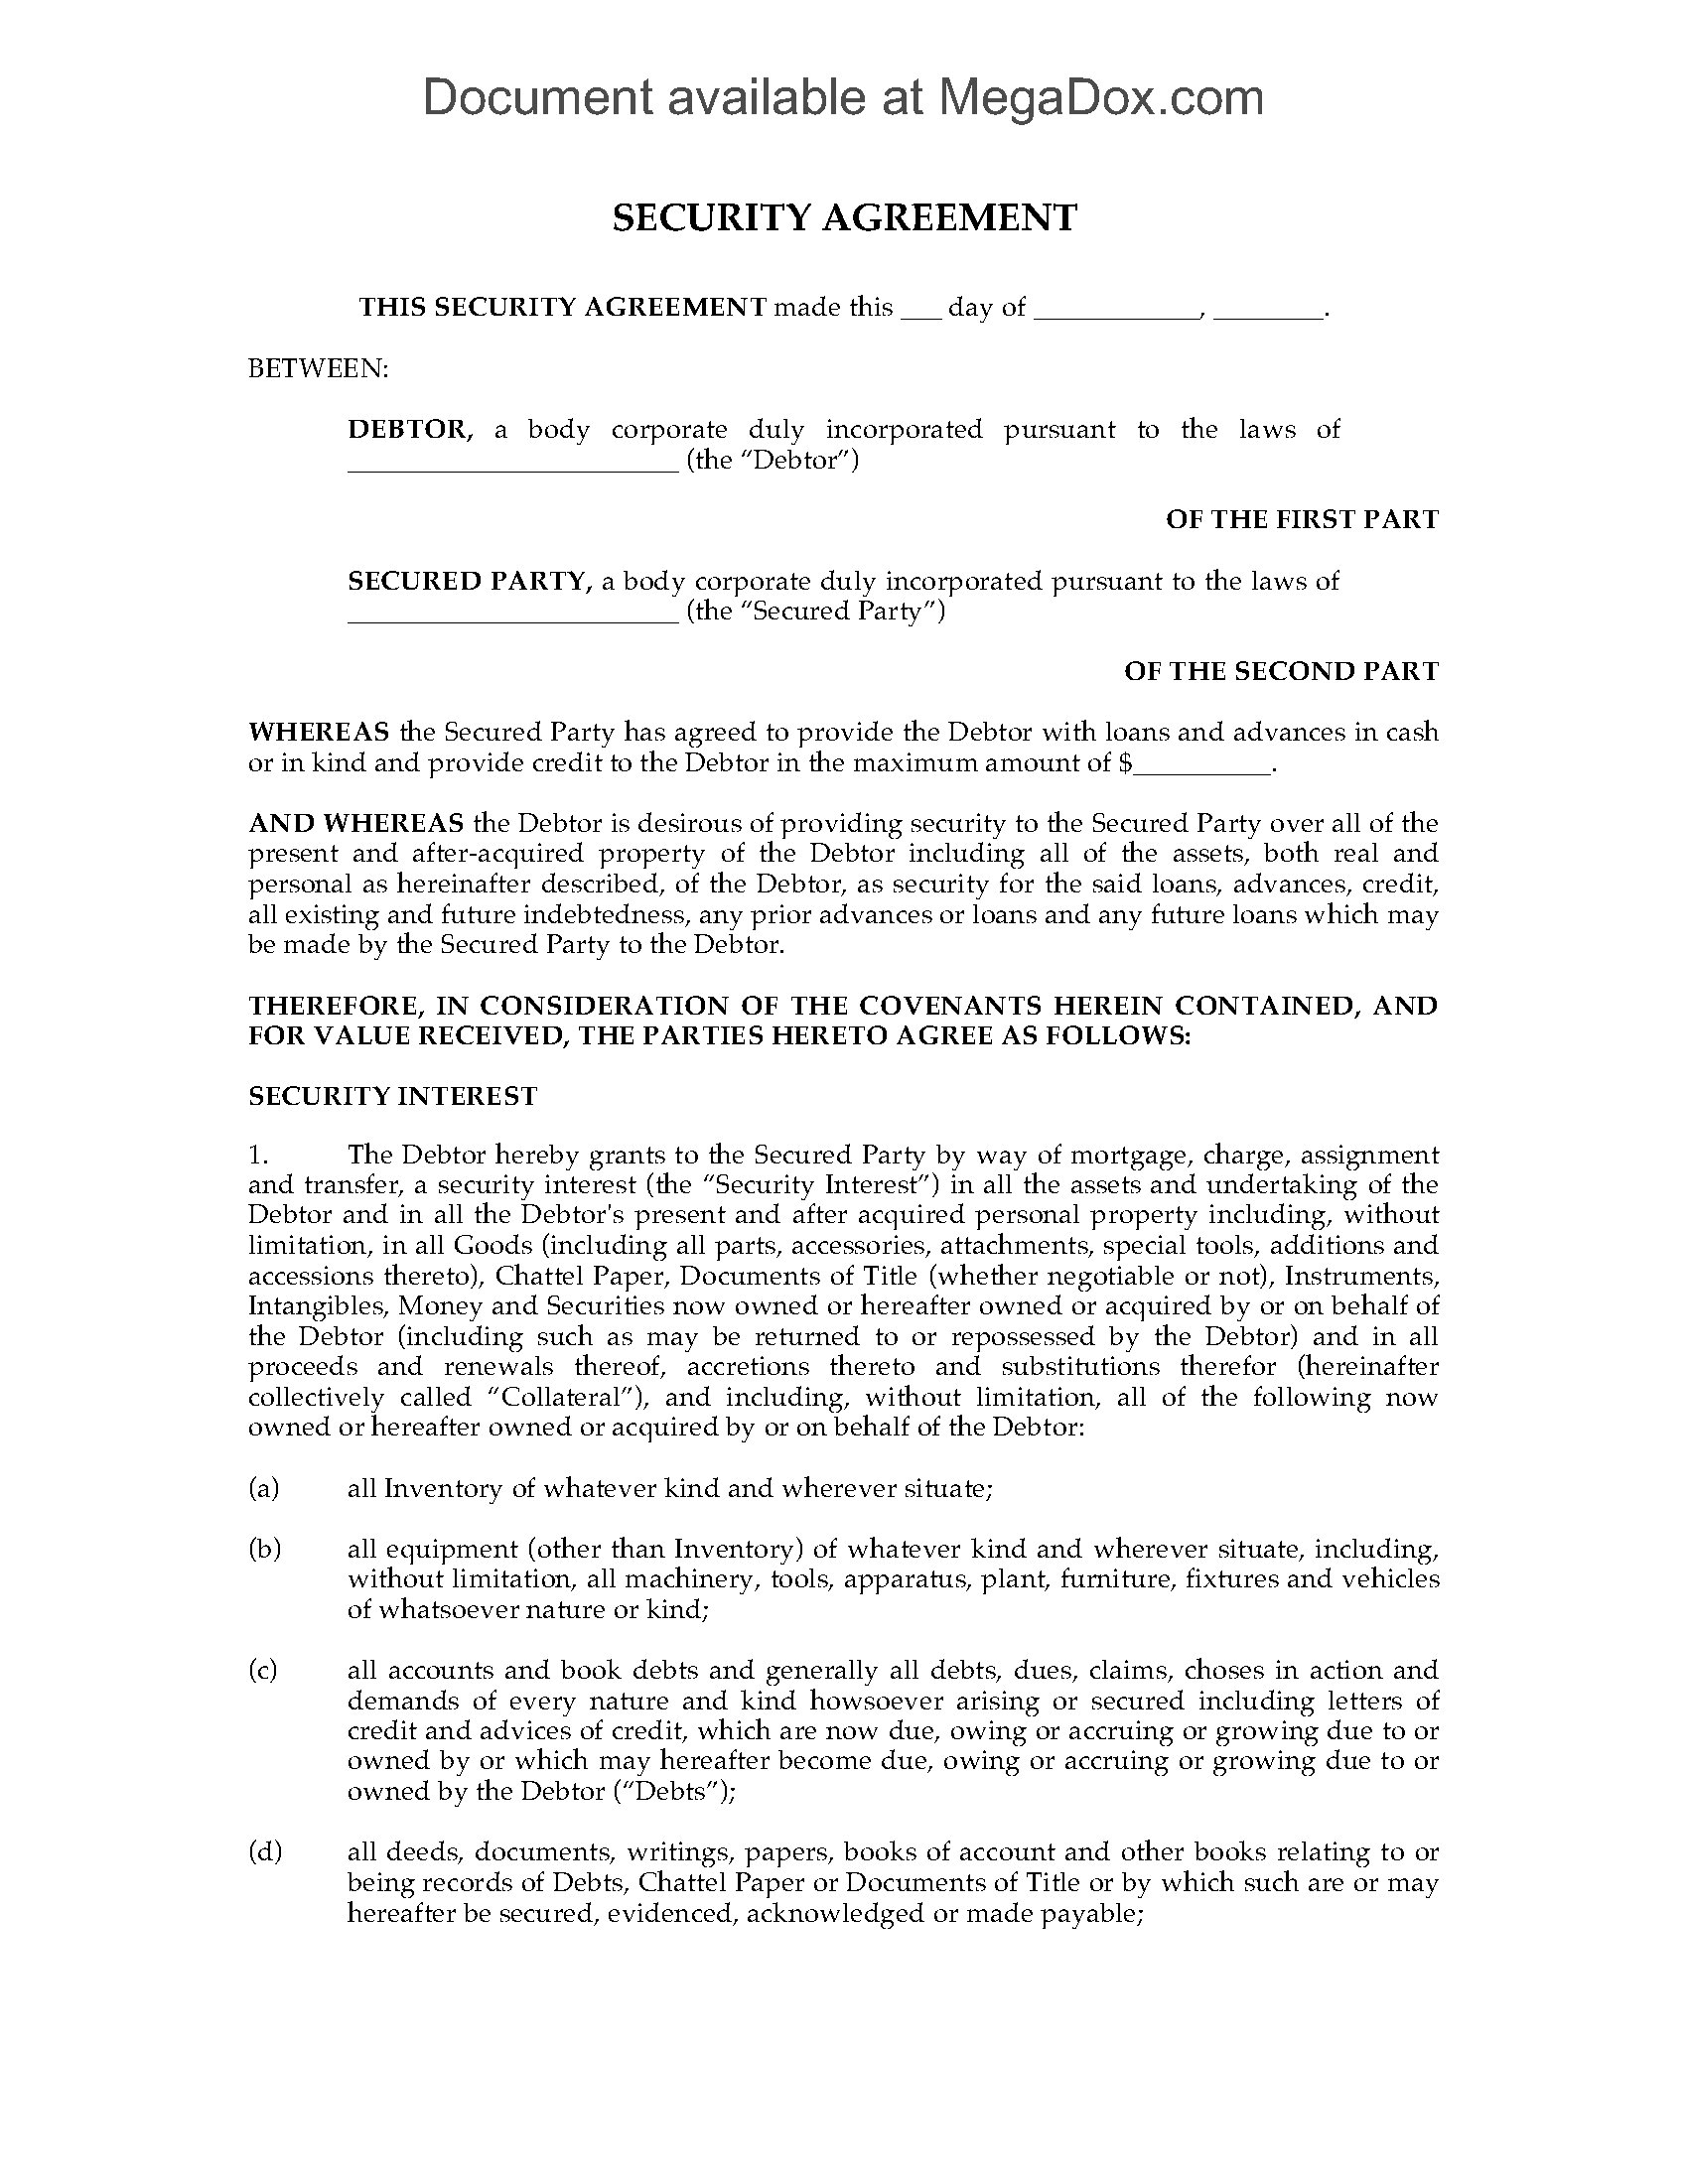 Canada General Security Agreement | Legal Forms and Business 